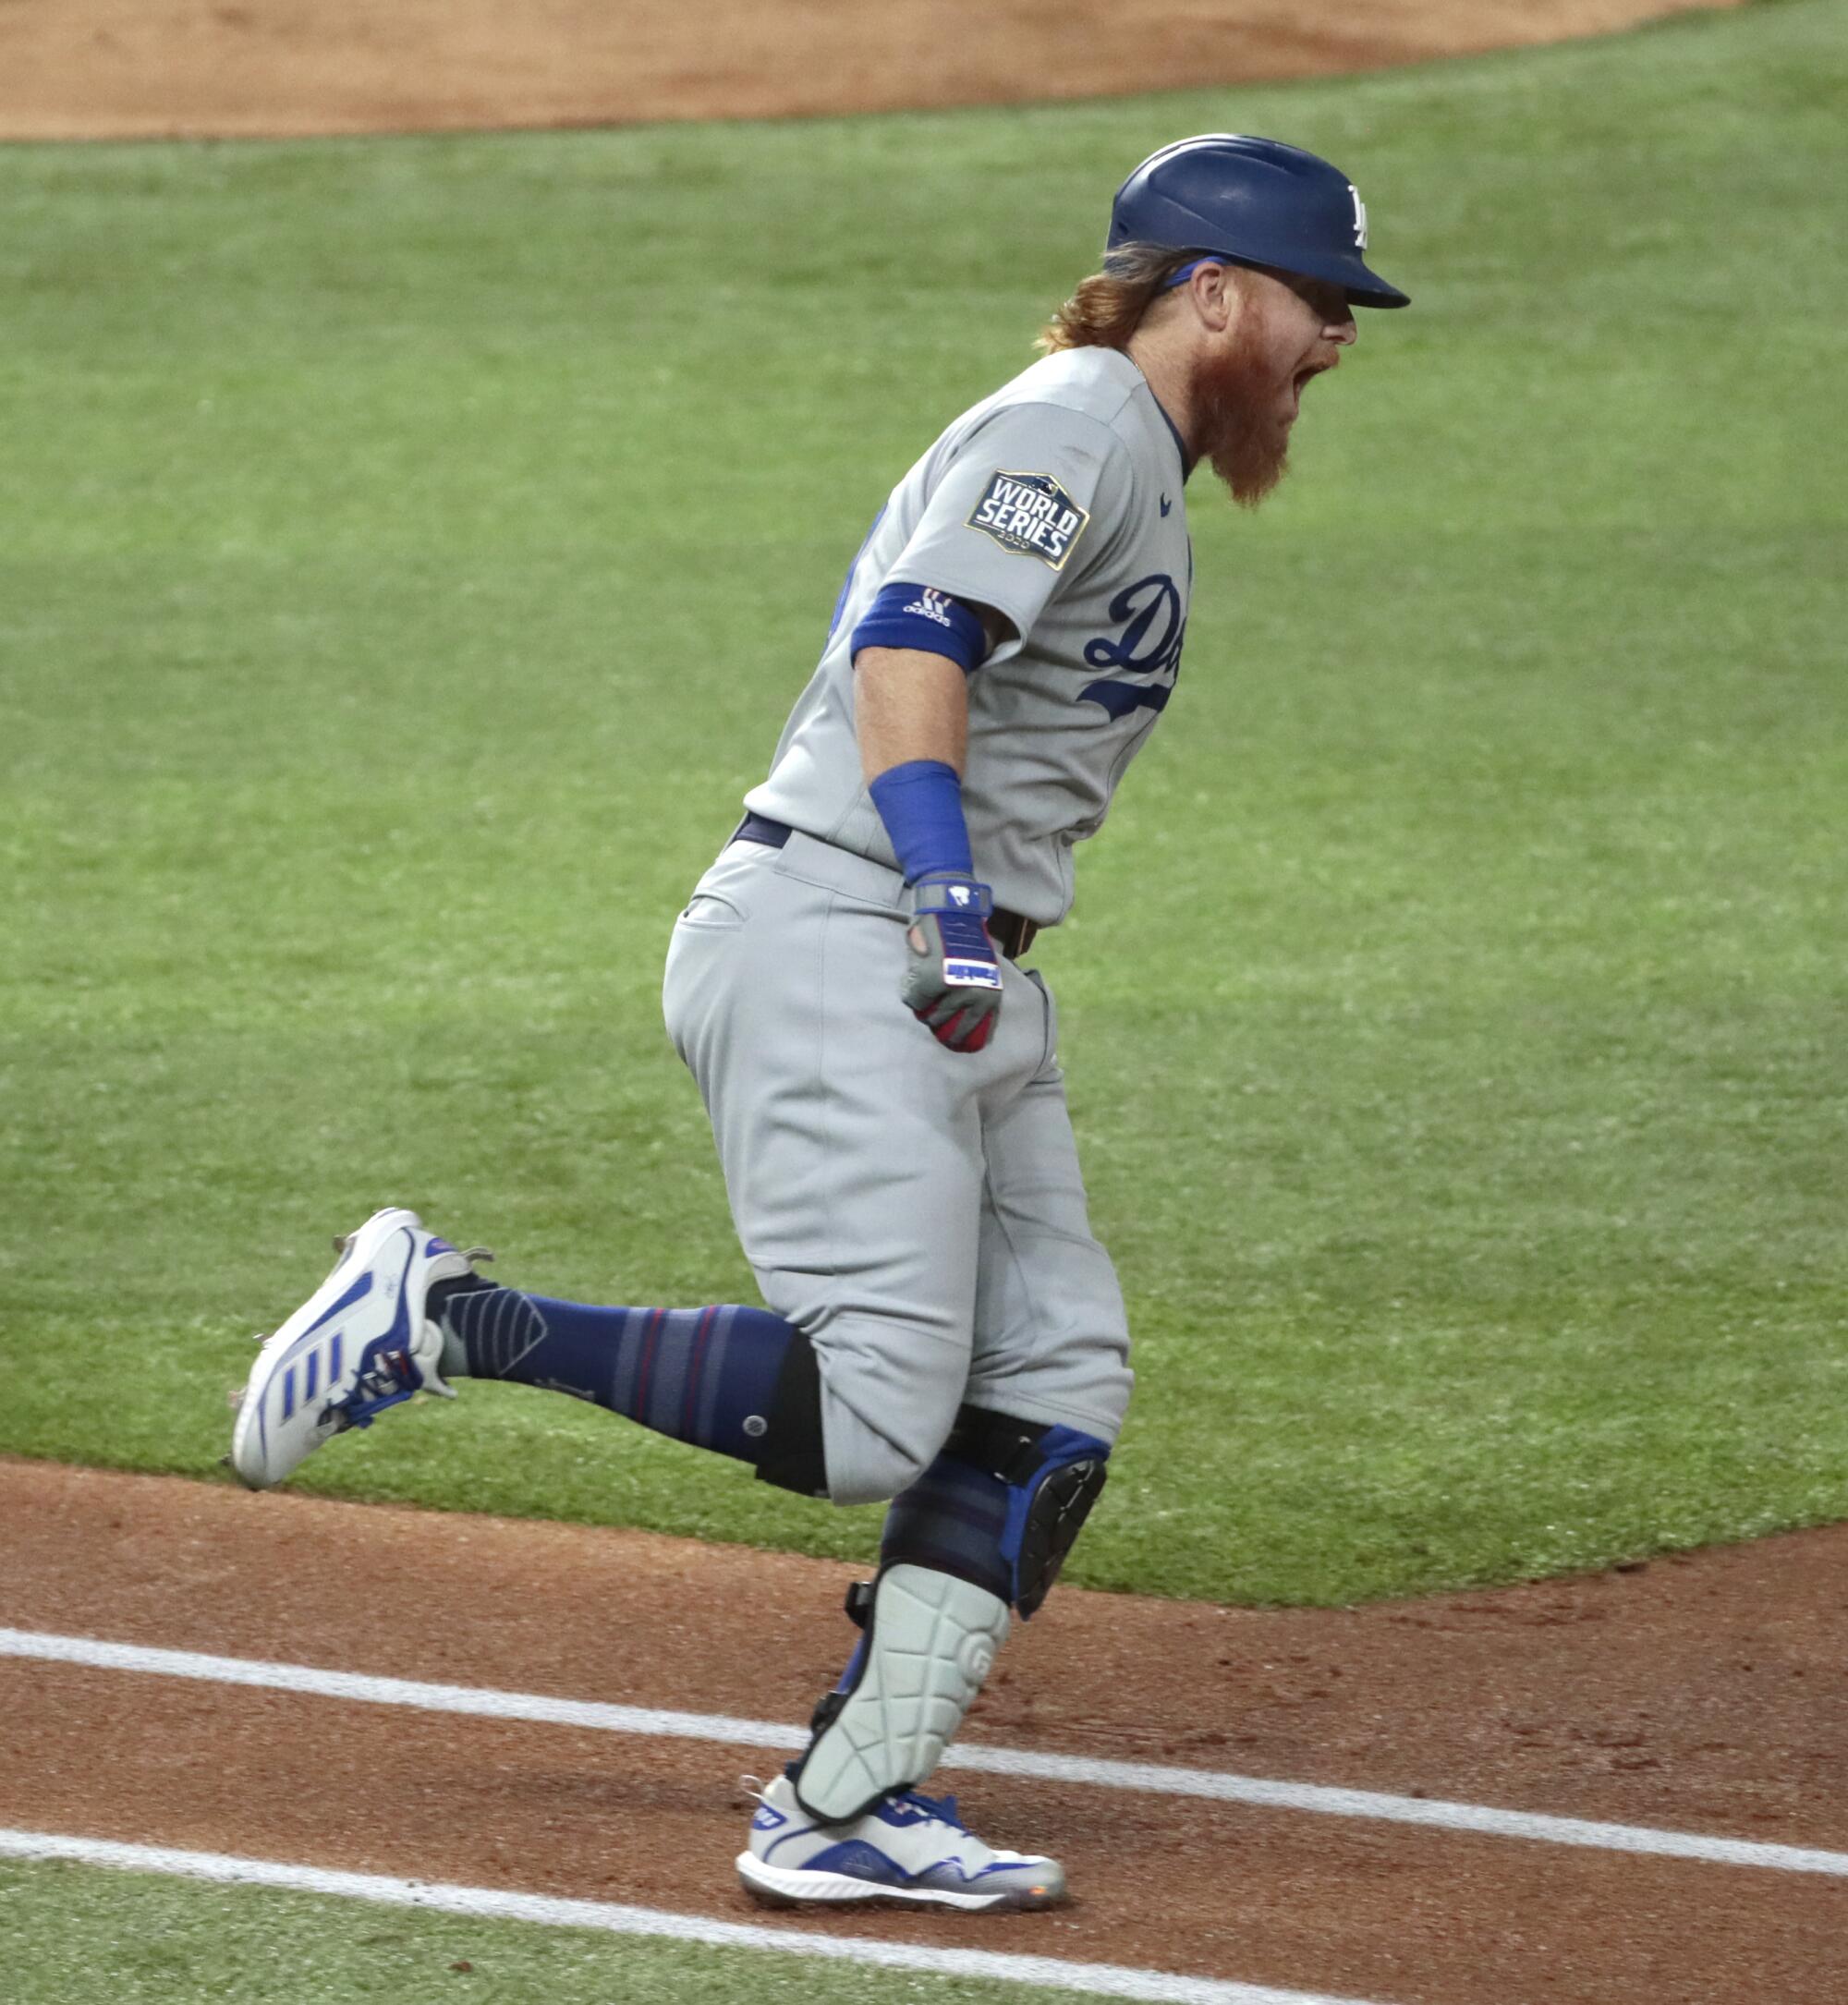 Justin Turner had two hits in Game 3, as many as he had in the first two games combined.